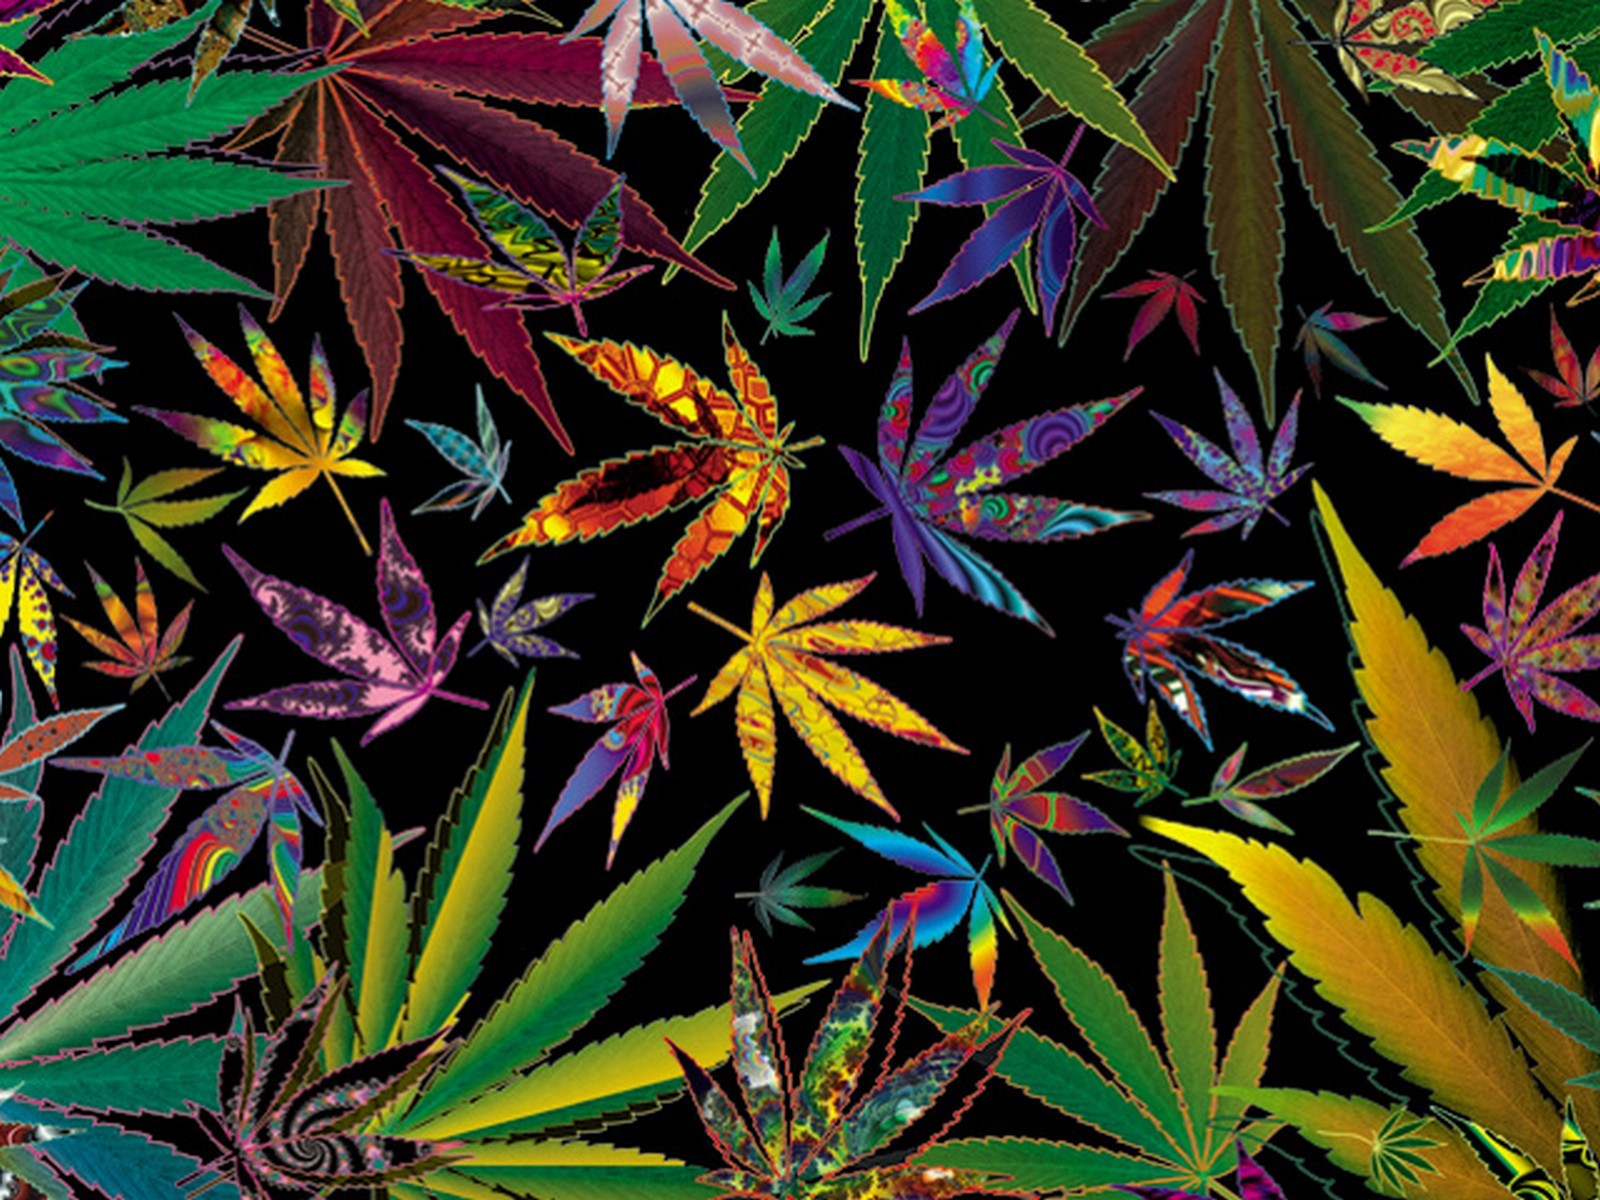 Trippy Weed Wallpaper Wallpapers, Backgrounds, Images, Art Photos